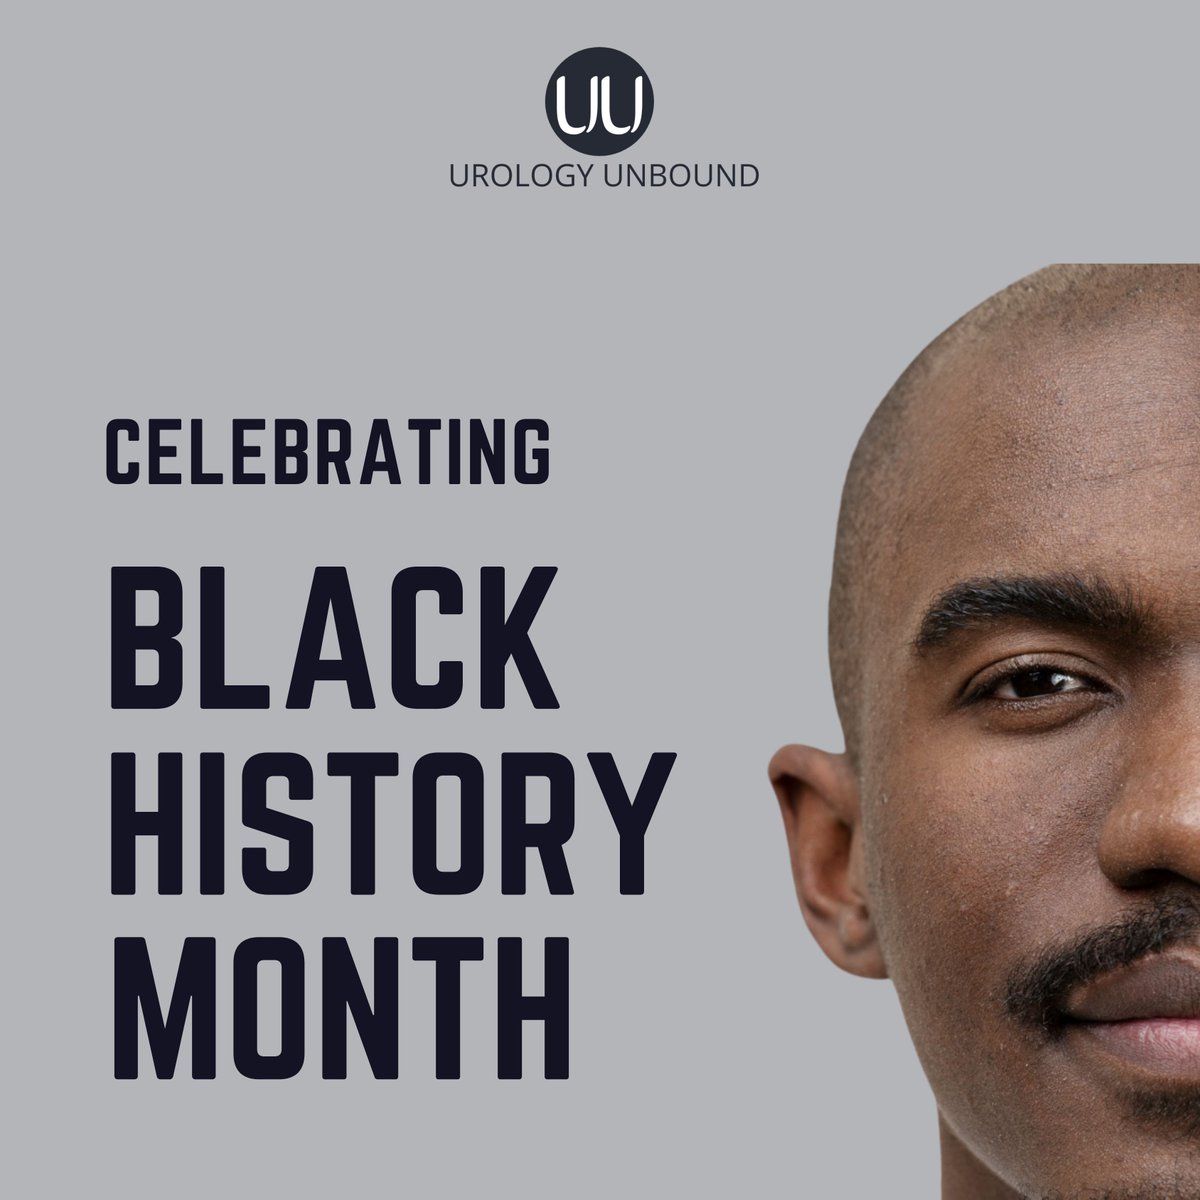 This #BlackHistoryMonth, we celebrate black leaders in #urology for breaking barriers and their remarkable contributions! Join us in honoring their achievements and taking action for a more equitable future. Donate today & make a meaningful impact! bit.ly/UU_Initiatives